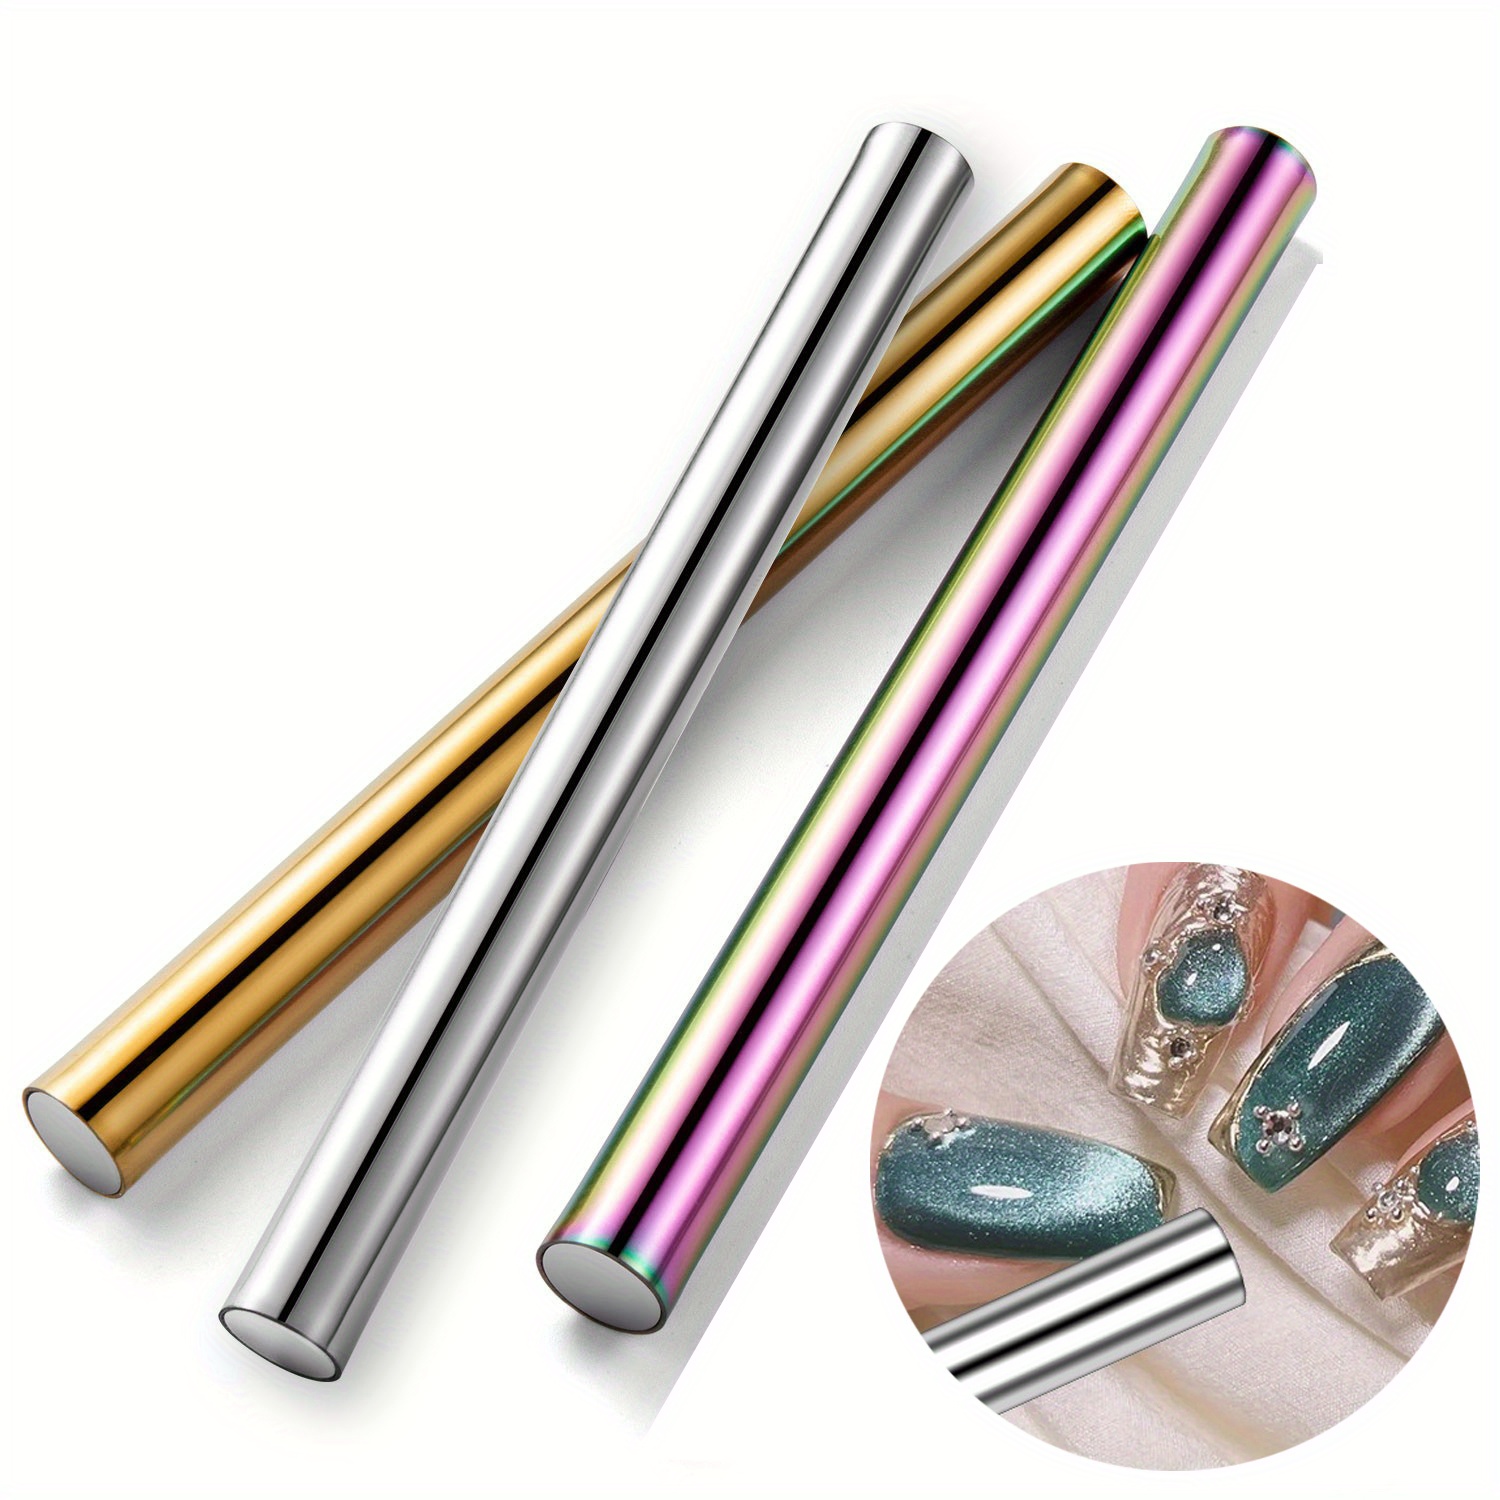 

Dual-ended Magnetic Nail Art Tools, Strong Magnet Stick For Cat Eye Gel Polish, Multi-functional Nail Design Accessories, Nail Art Equipment